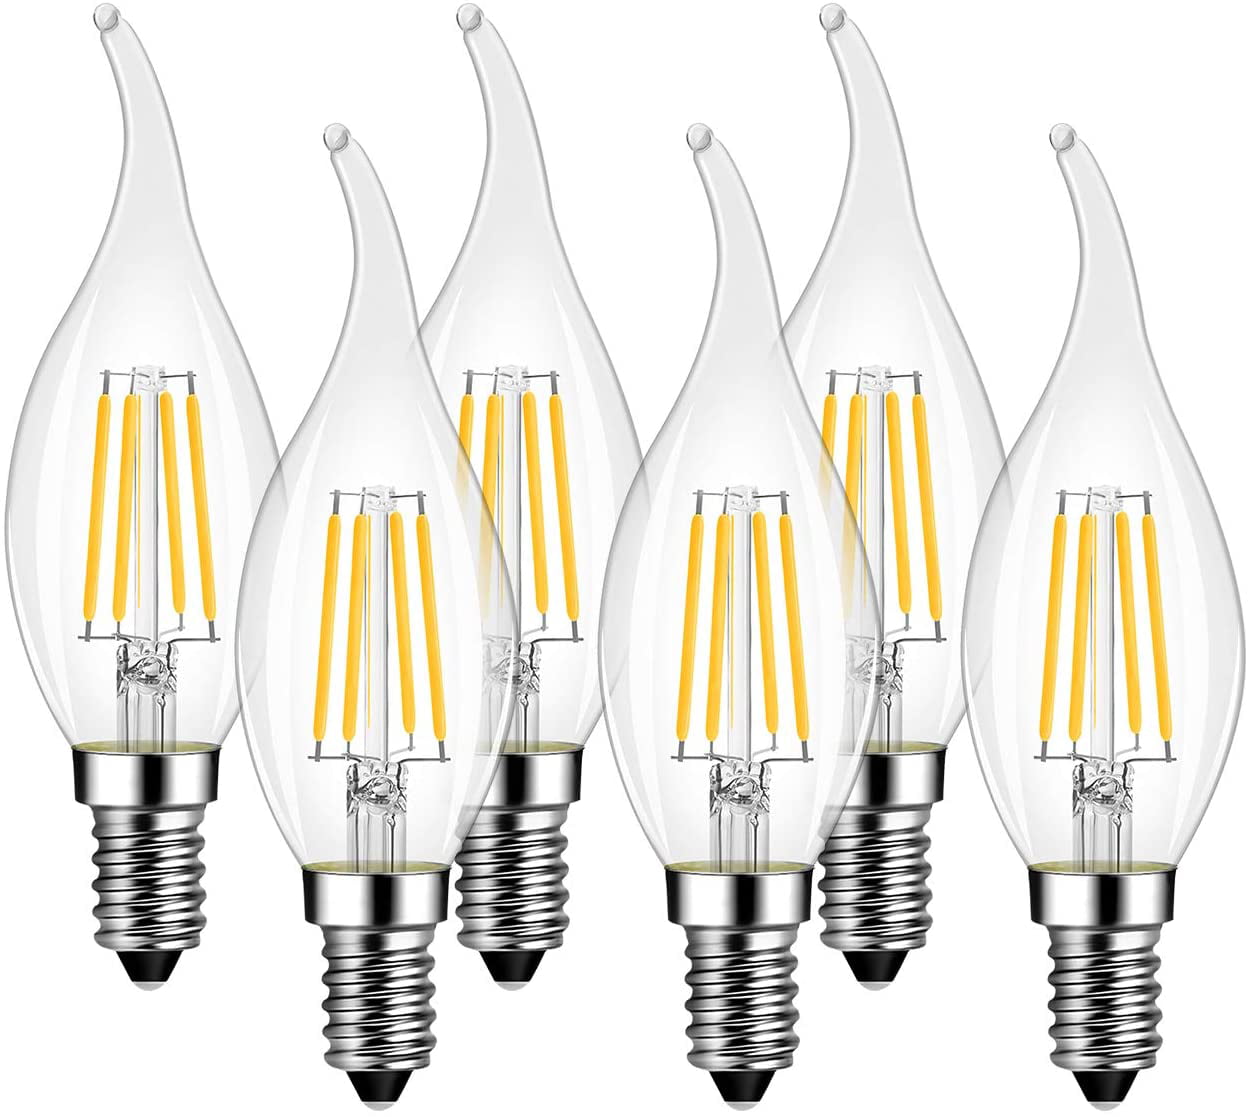 5W SES Candle Bulb B35 470lm E14 LED Dimmable Candle Light Bulbs 40W 6 PACK